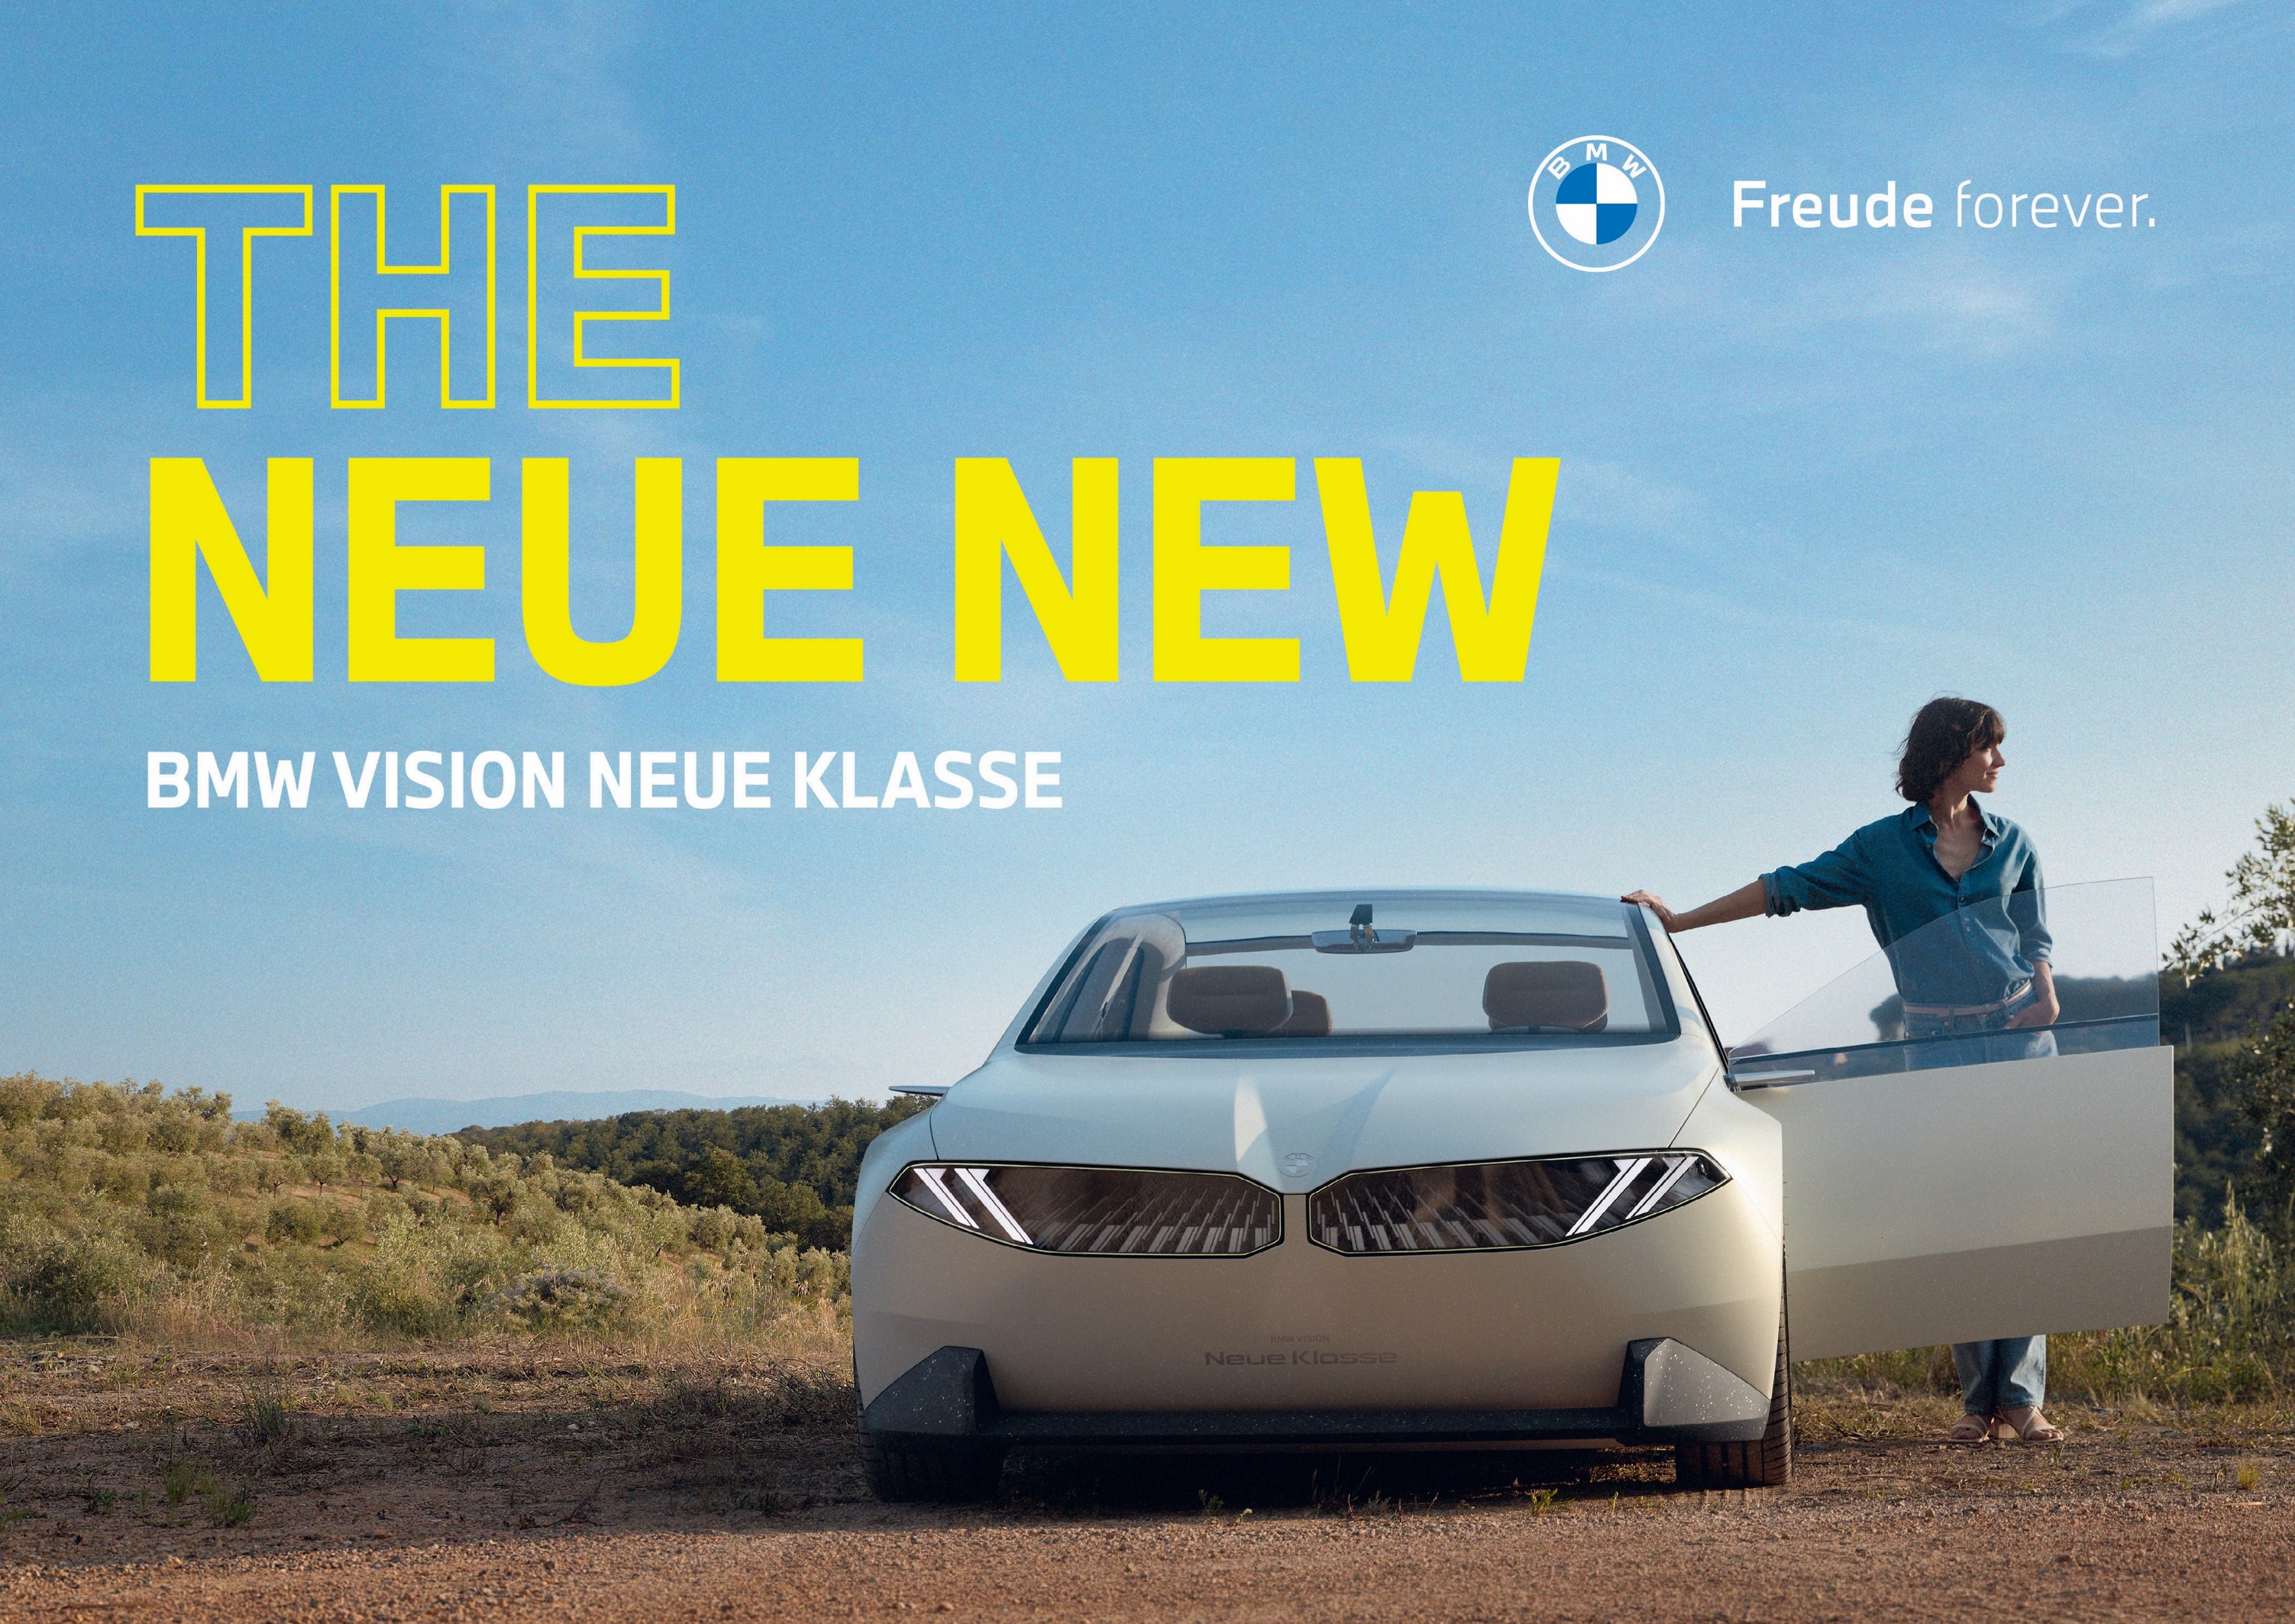 THE NEUE NEW: BMW accompanies the departure into a new era with an emotionally engaging multi-channel campaign.